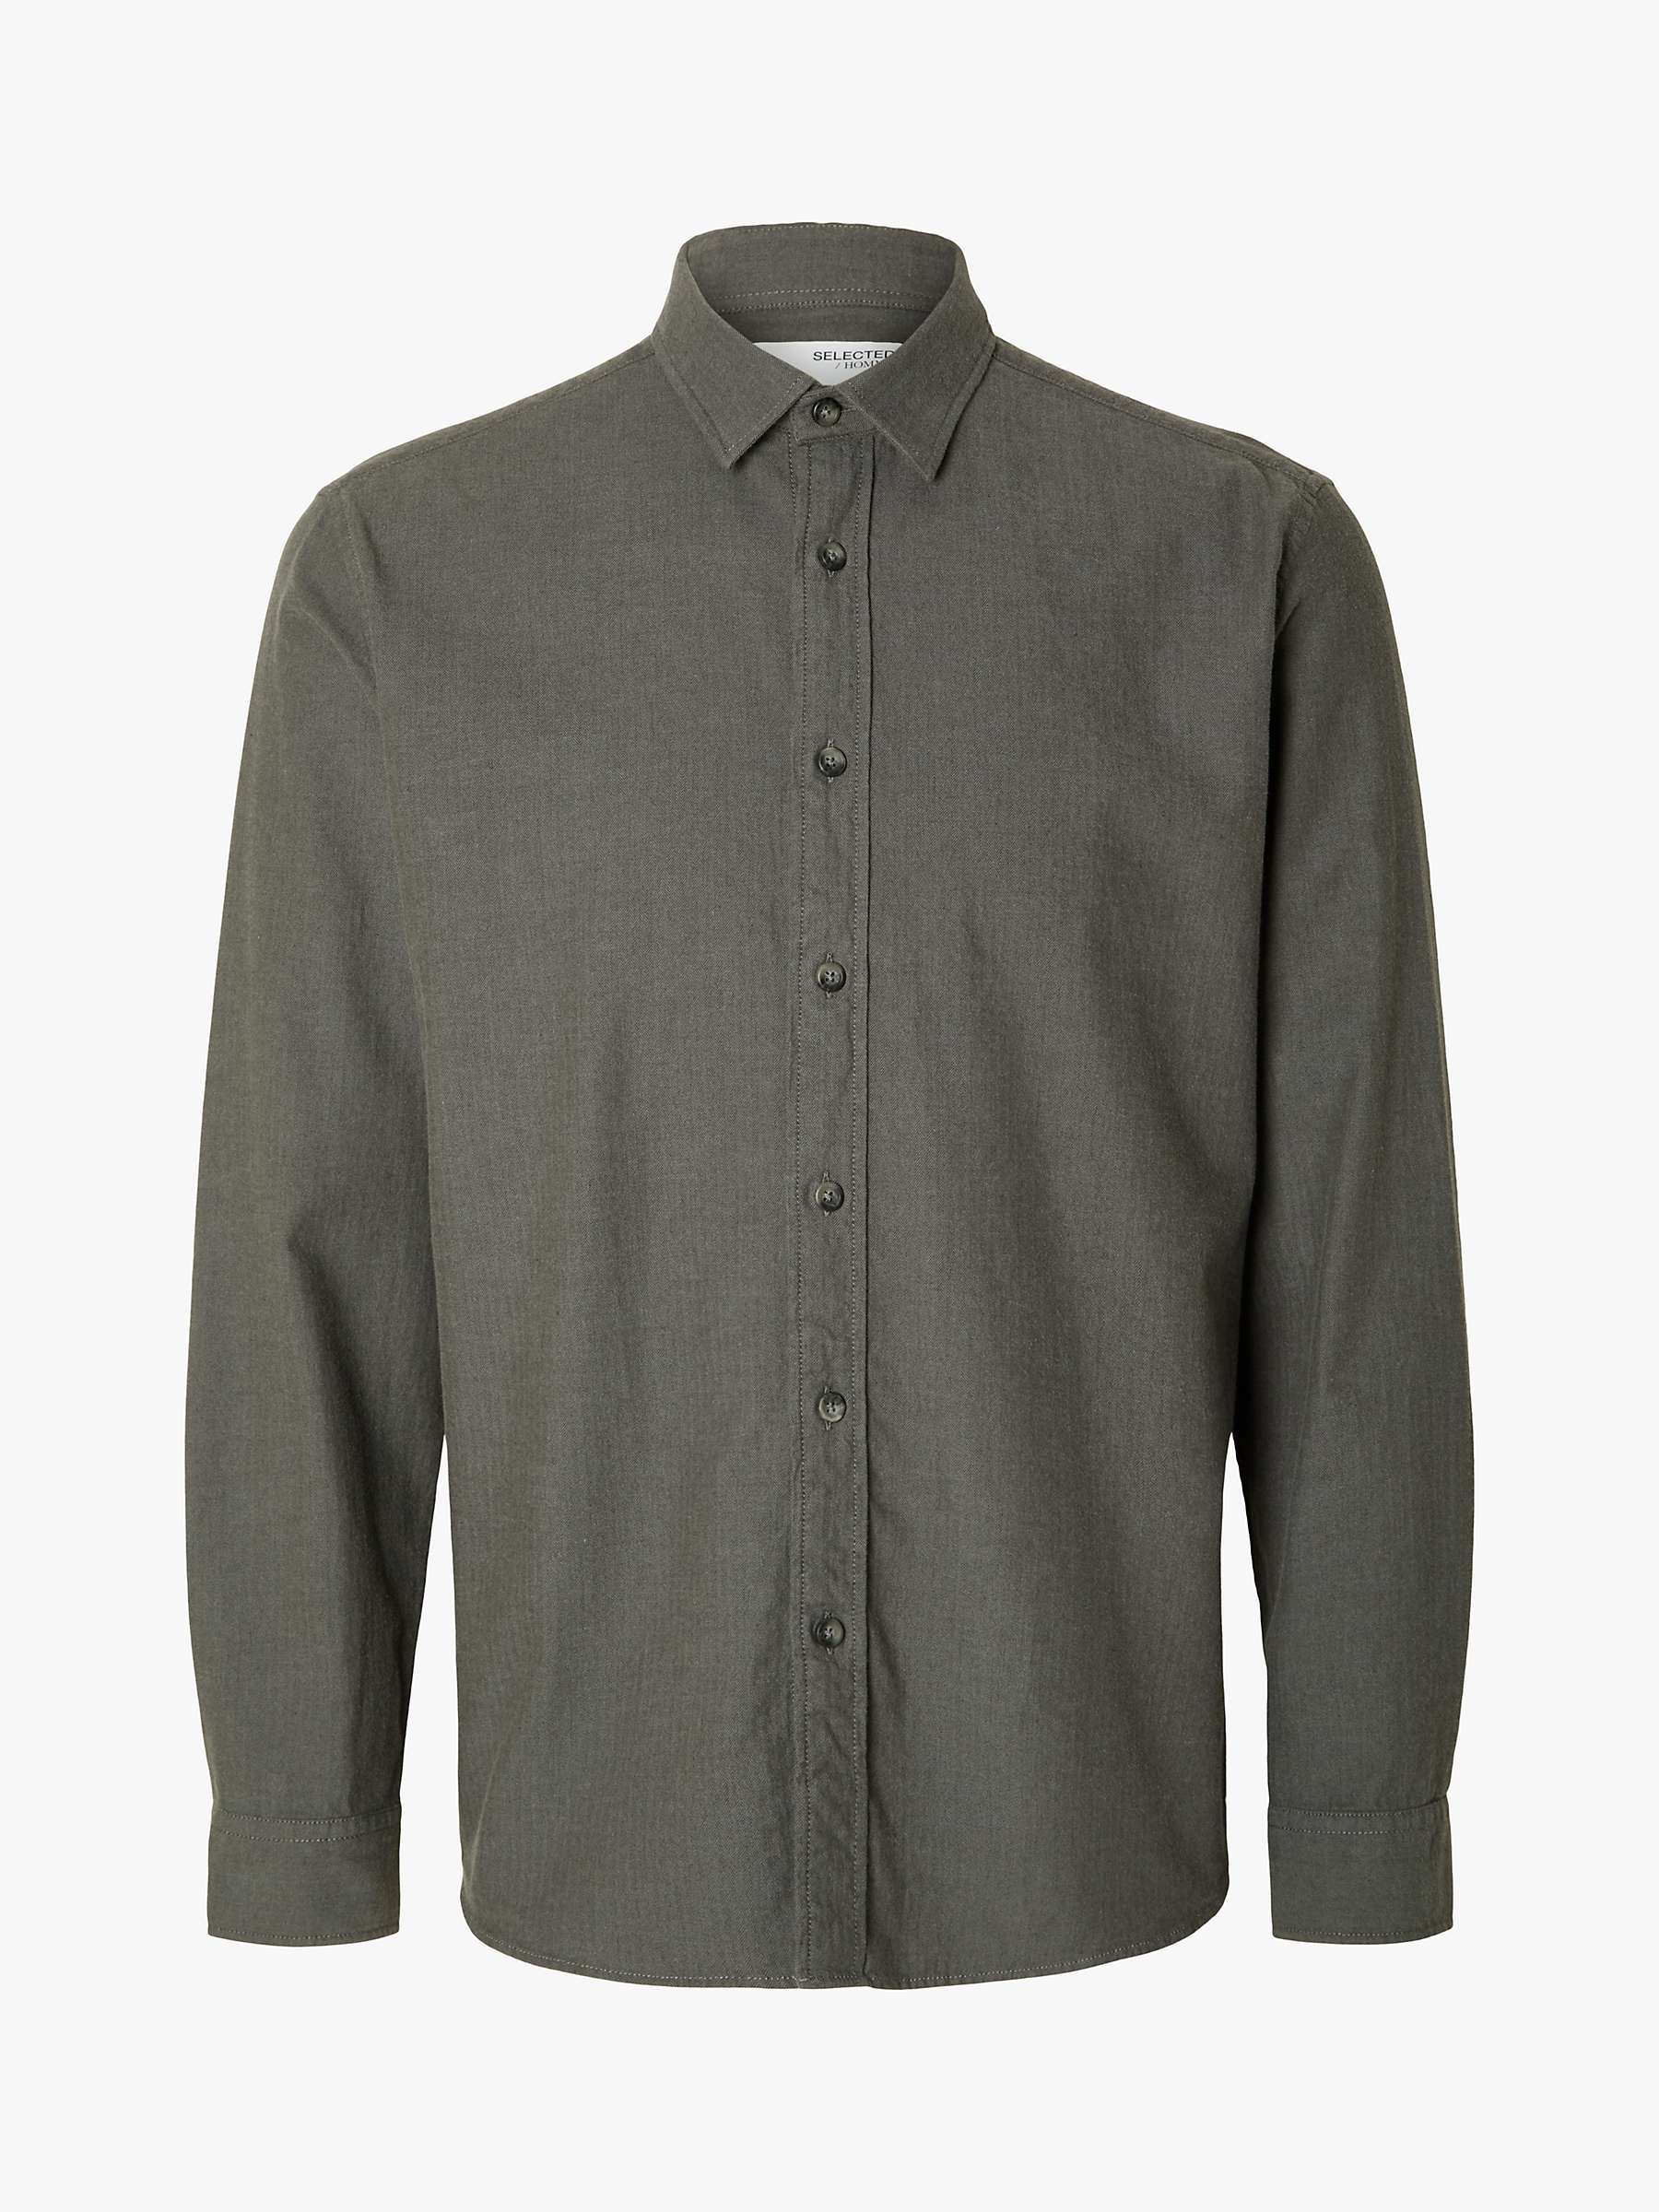 Buy SELECTED HOMME Owen Recycled Cotton Flannel Shirt Online at johnlewis.com